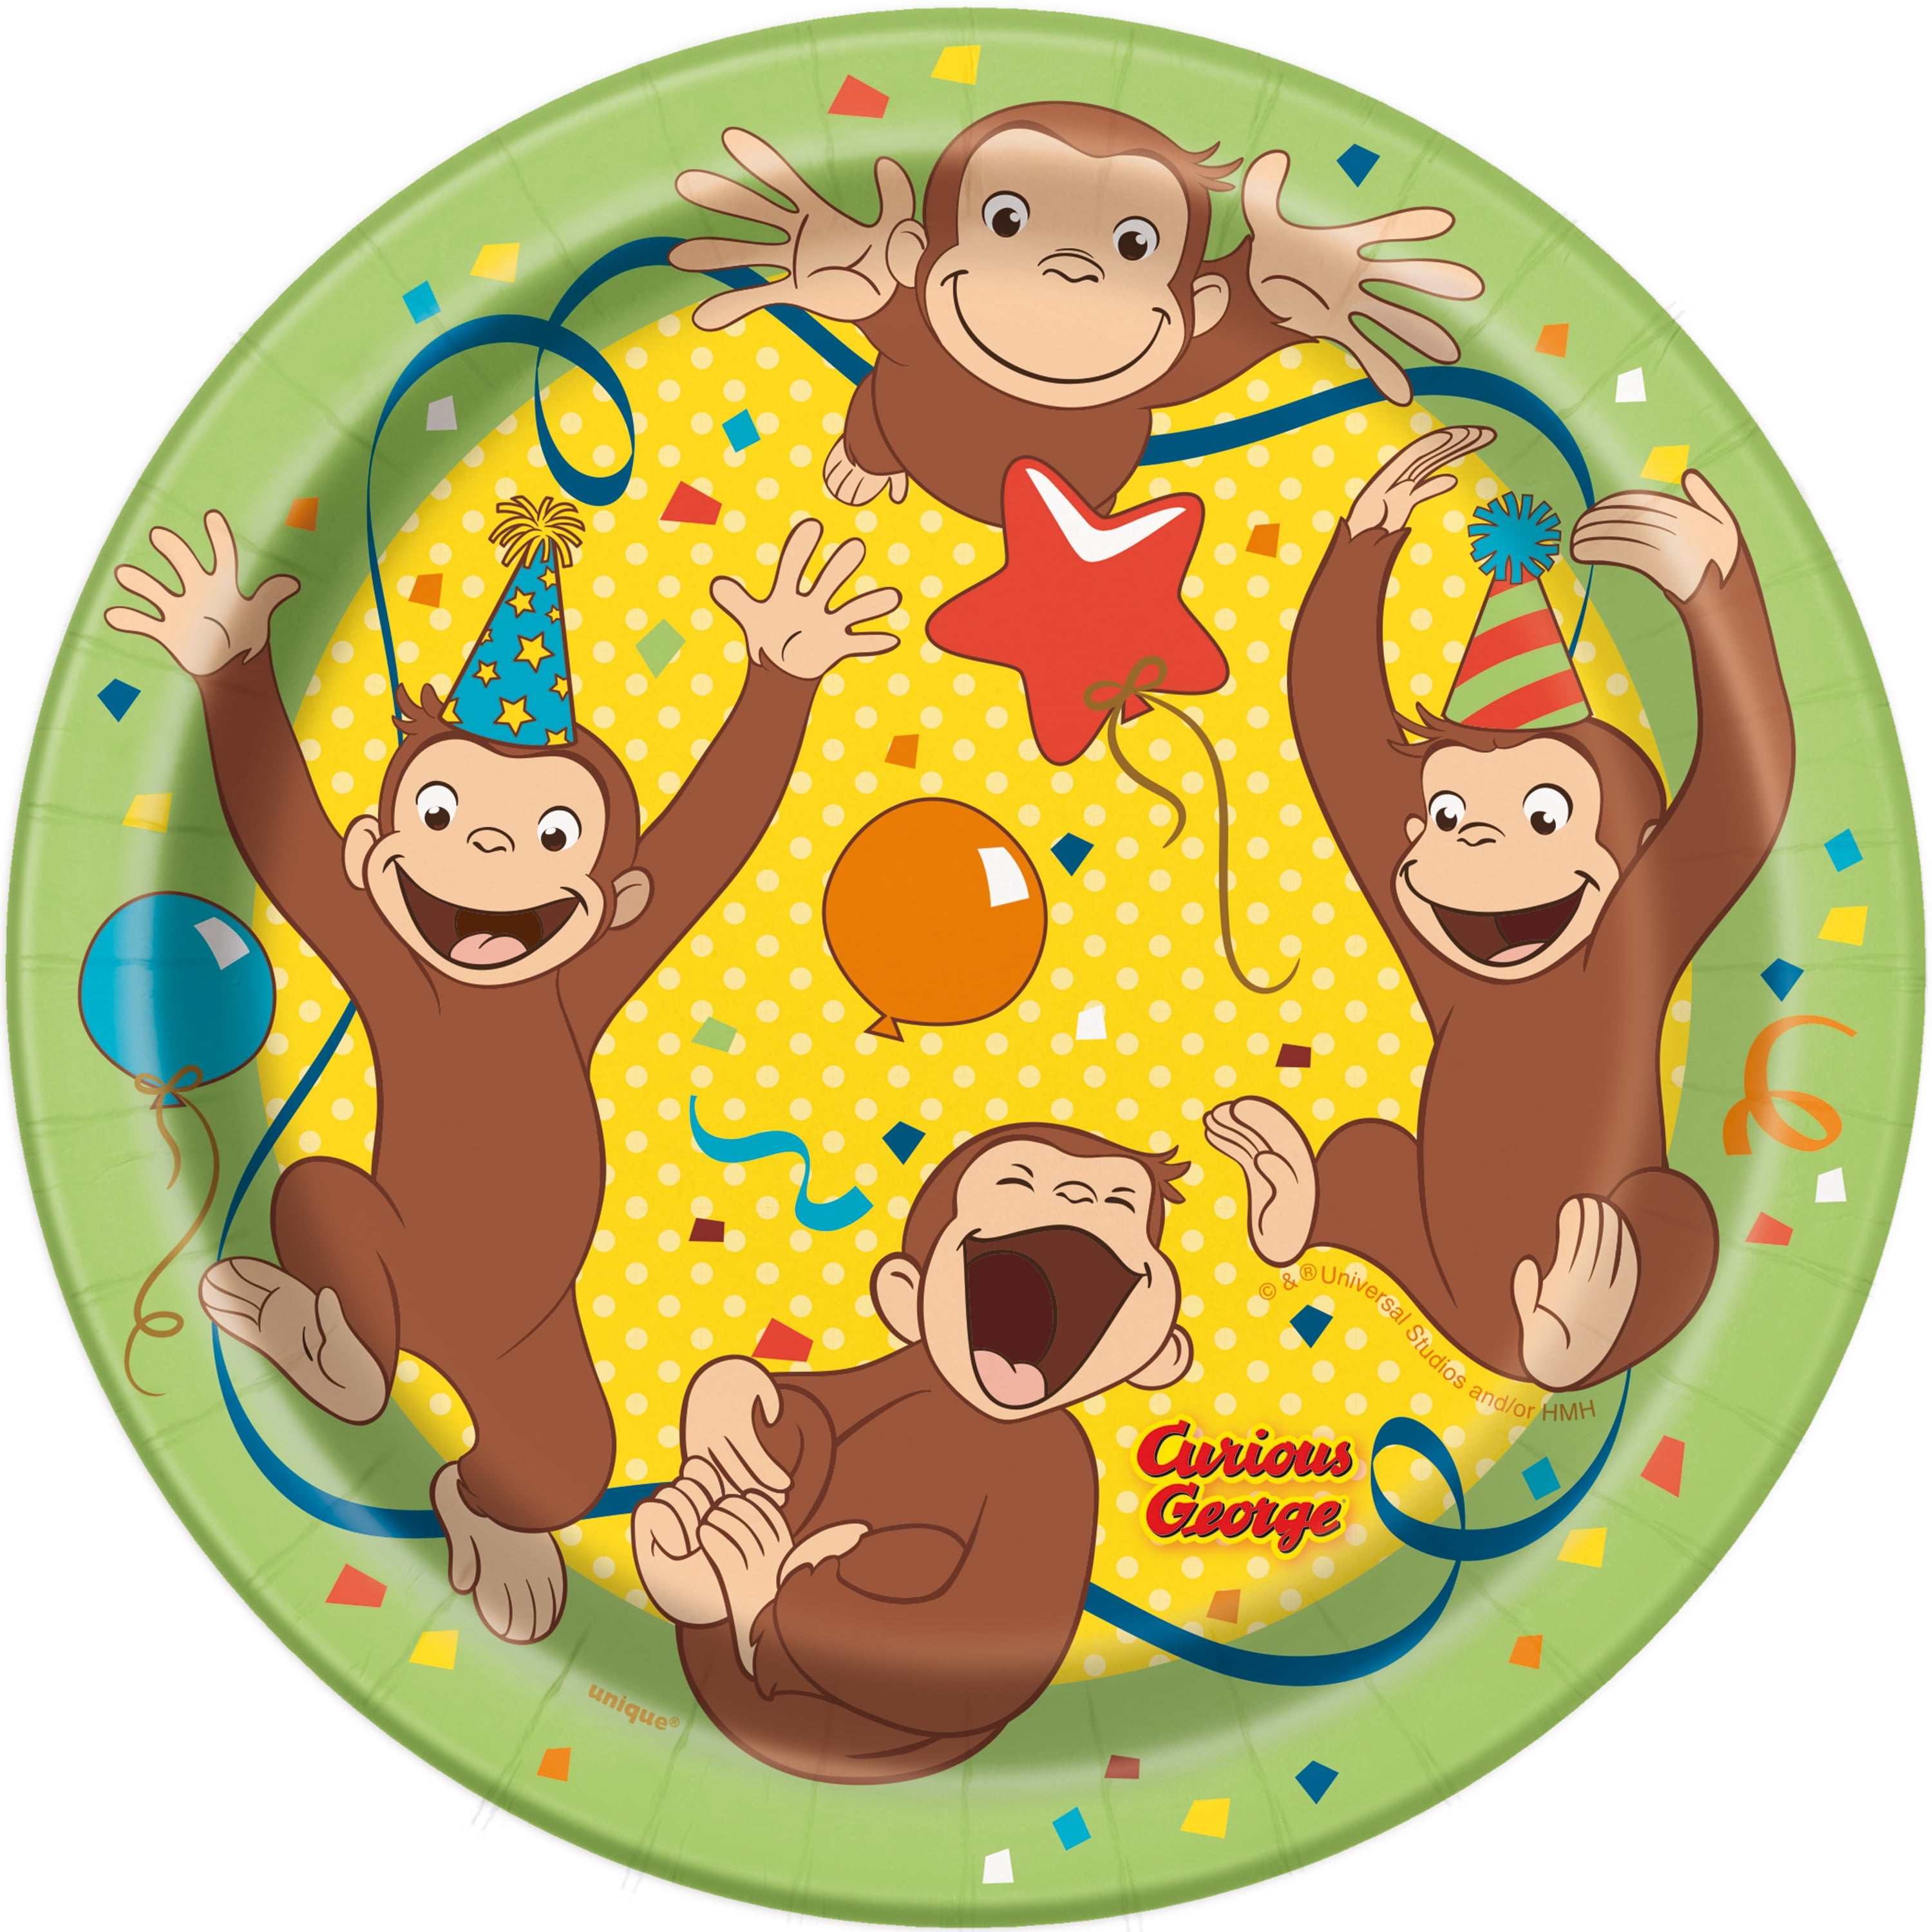 Curious George Plastic Loot Party Favor Bags 8 Pack NEW this is for 1 pack of 8 